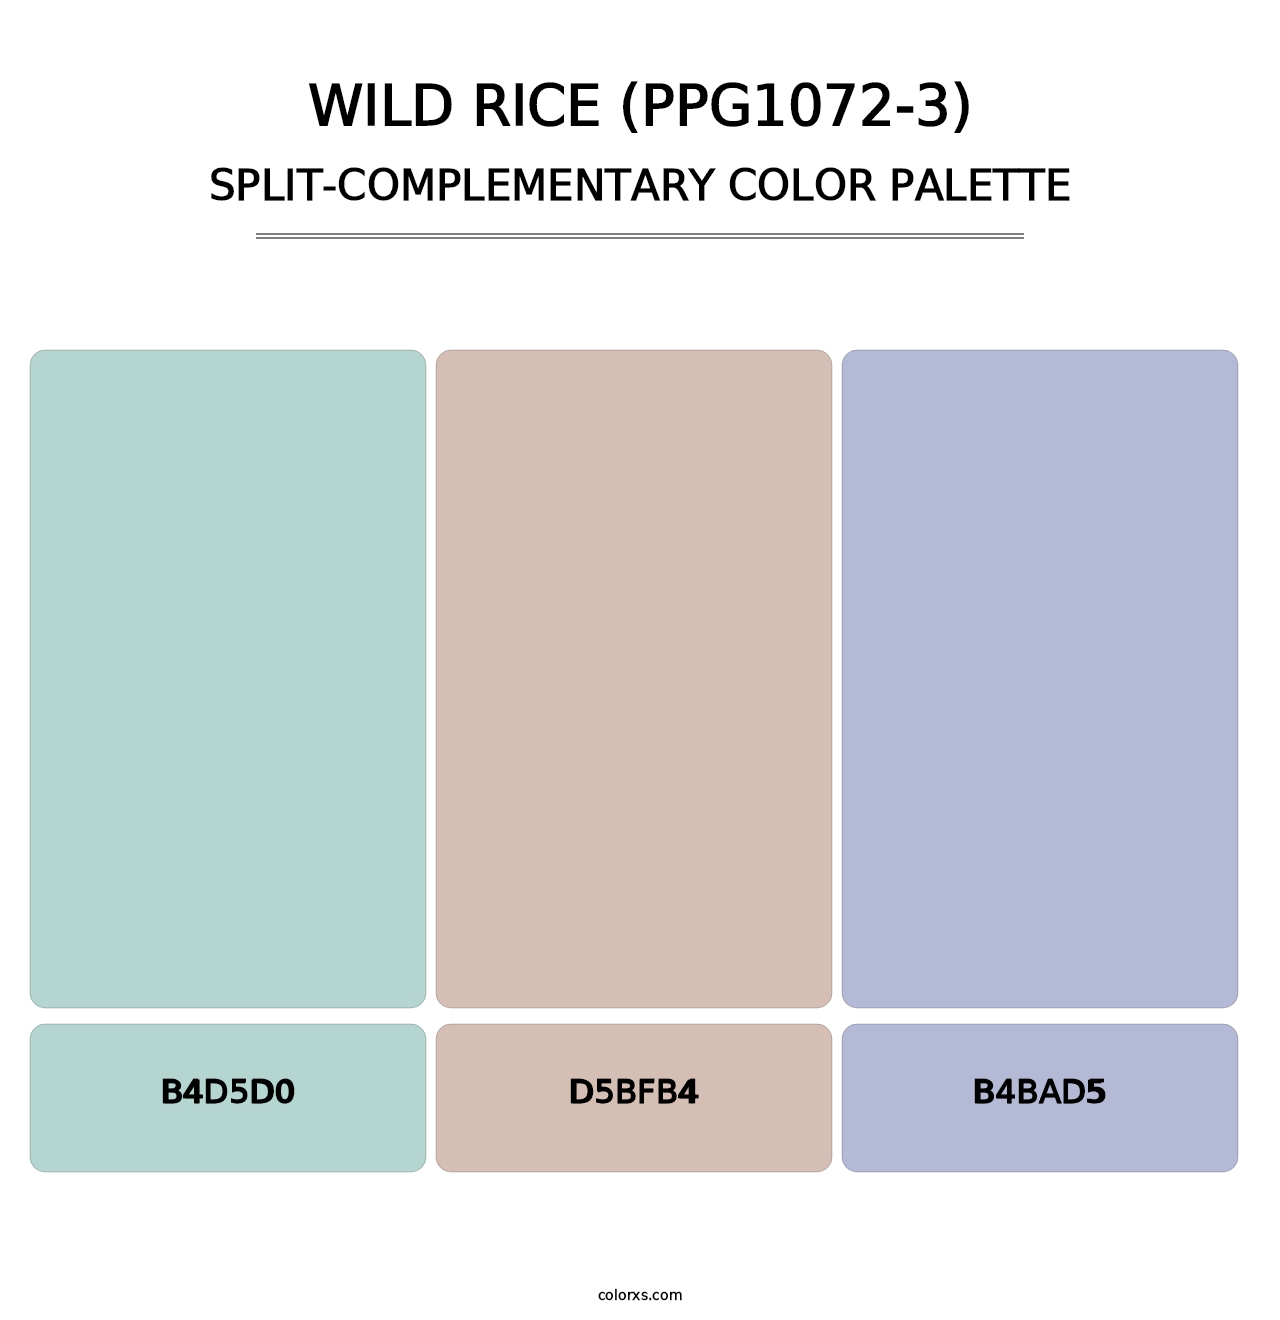 Wild Rice (PPG1072-3) - Split-Complementary Color Palette